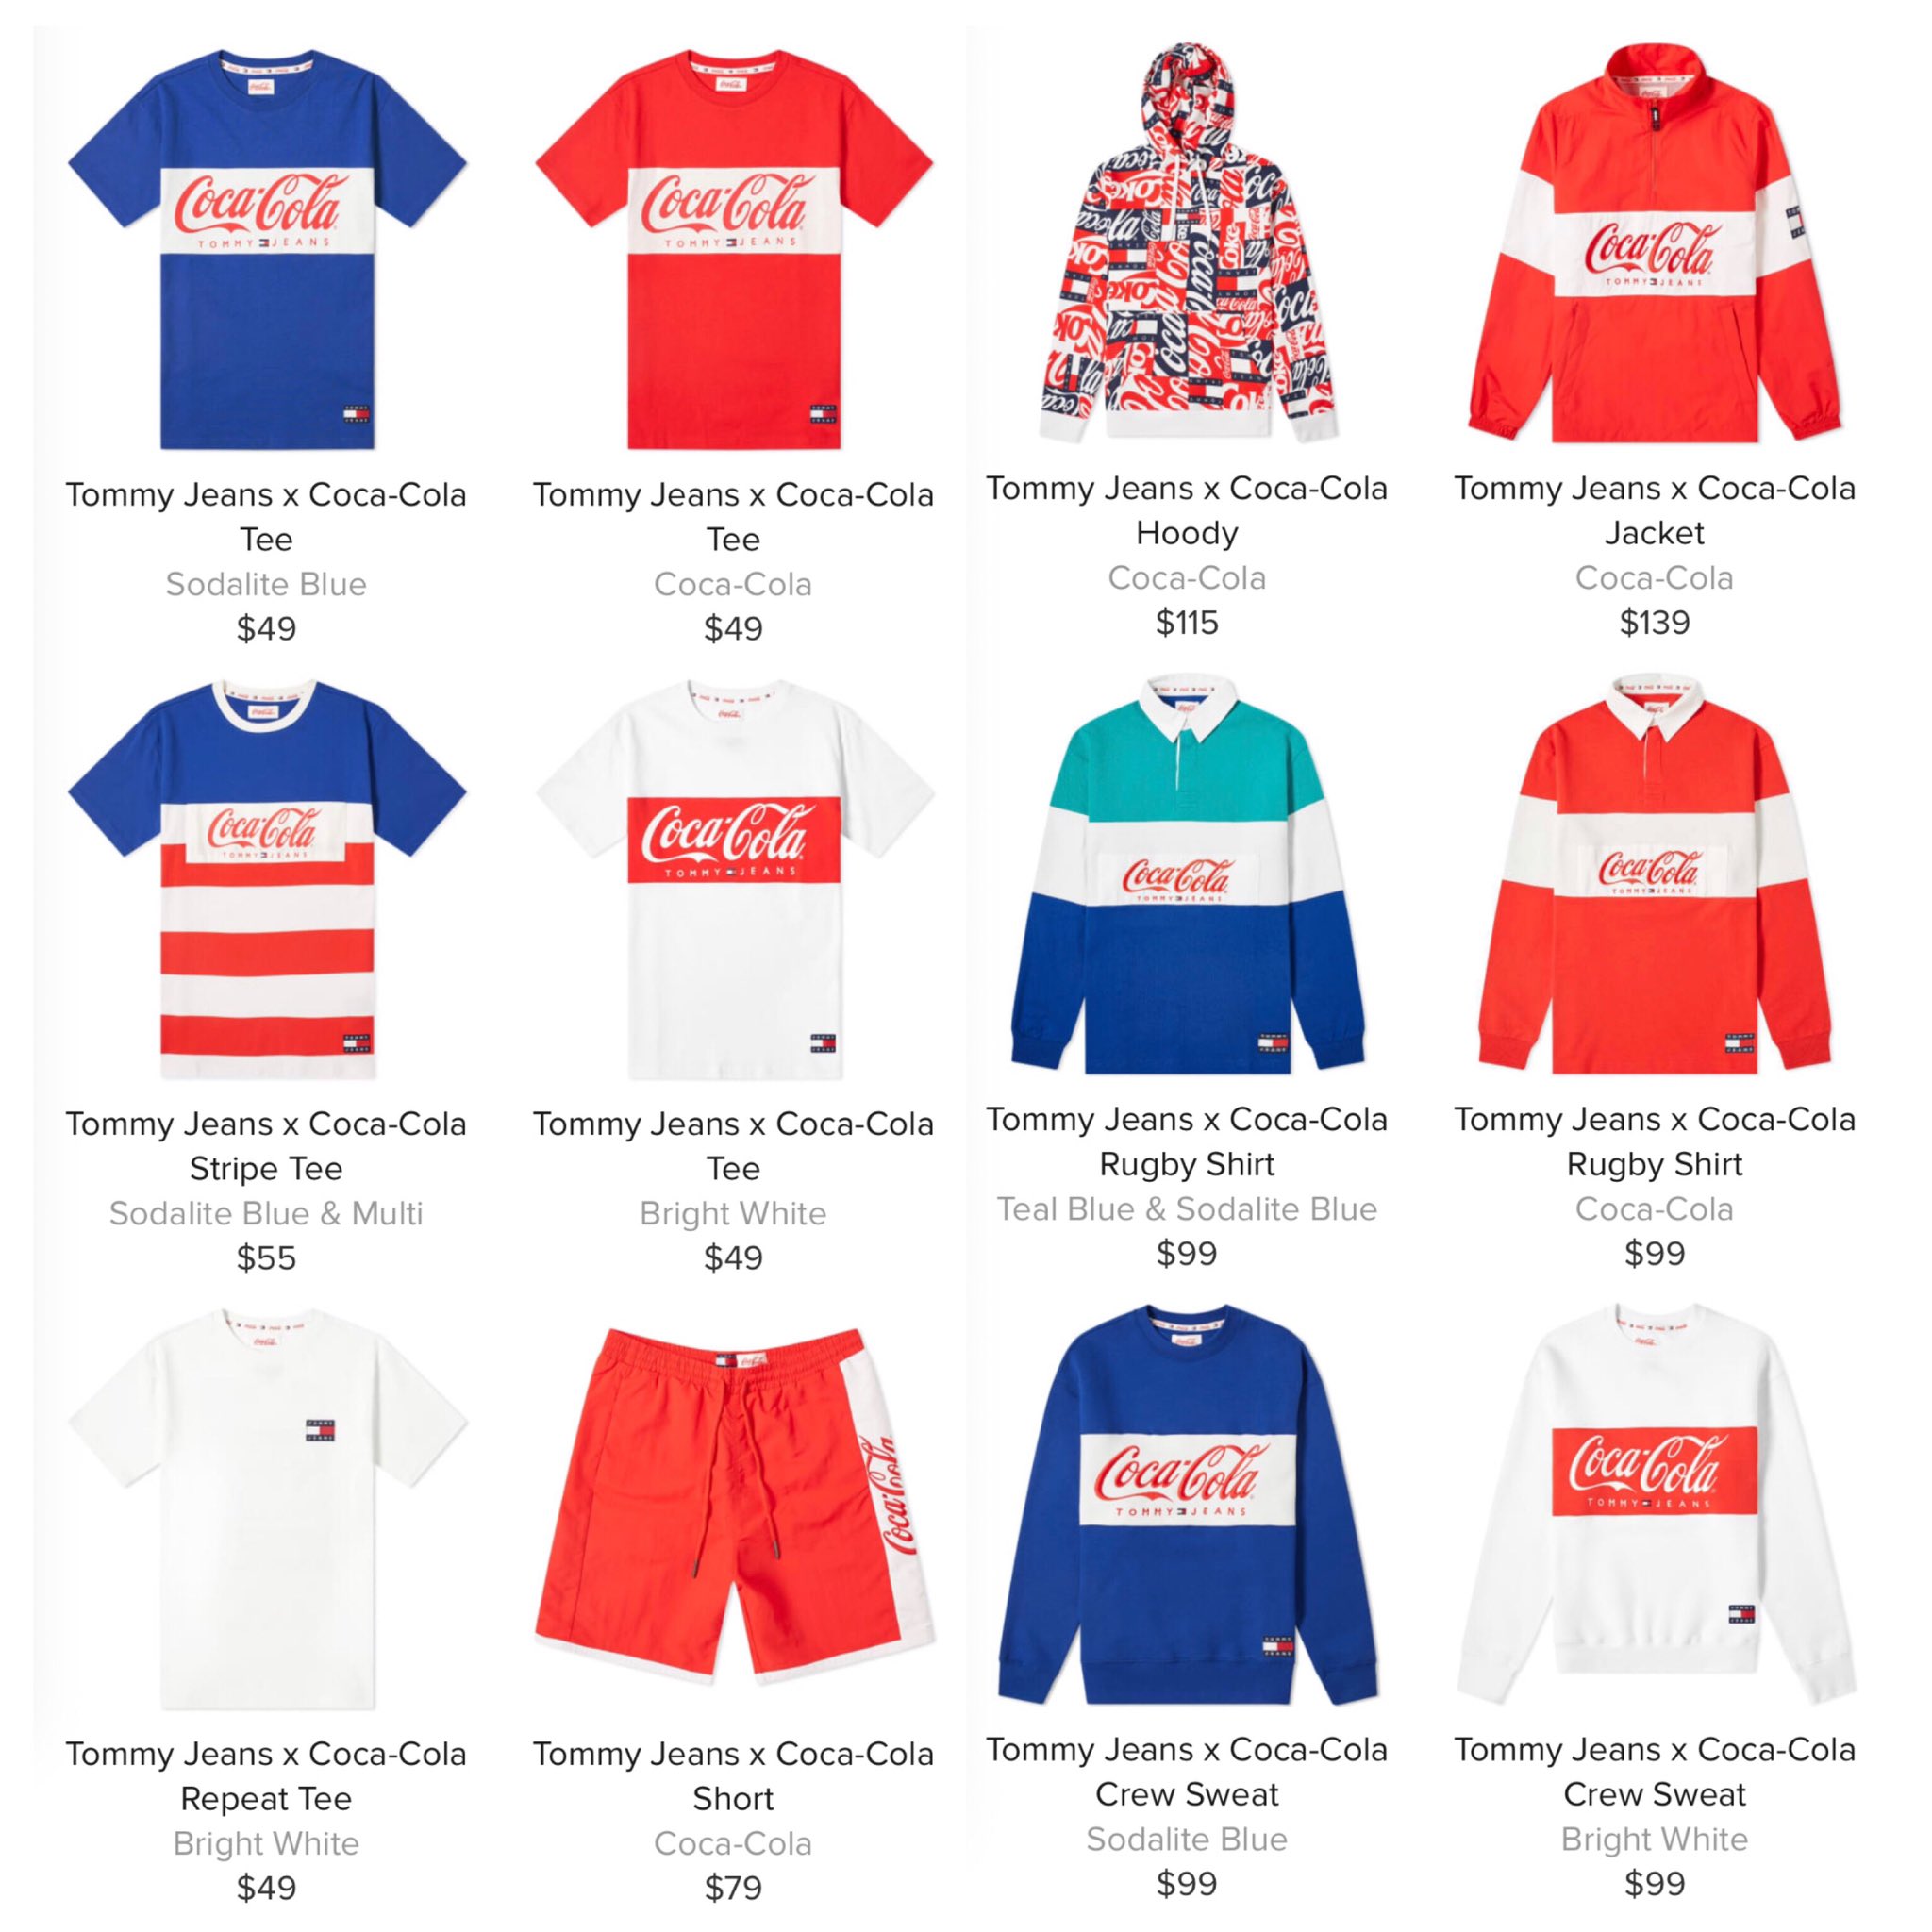 SNKR_TWITR on X: "LIVE in 25 minutes via @endclothing Tommy Hilfiger x Cola apparel collection https://t.co/1us1bpxFhL https://t.co/1us1bpxFhL #AD https://t.co/IDsBLLr1pi" / X